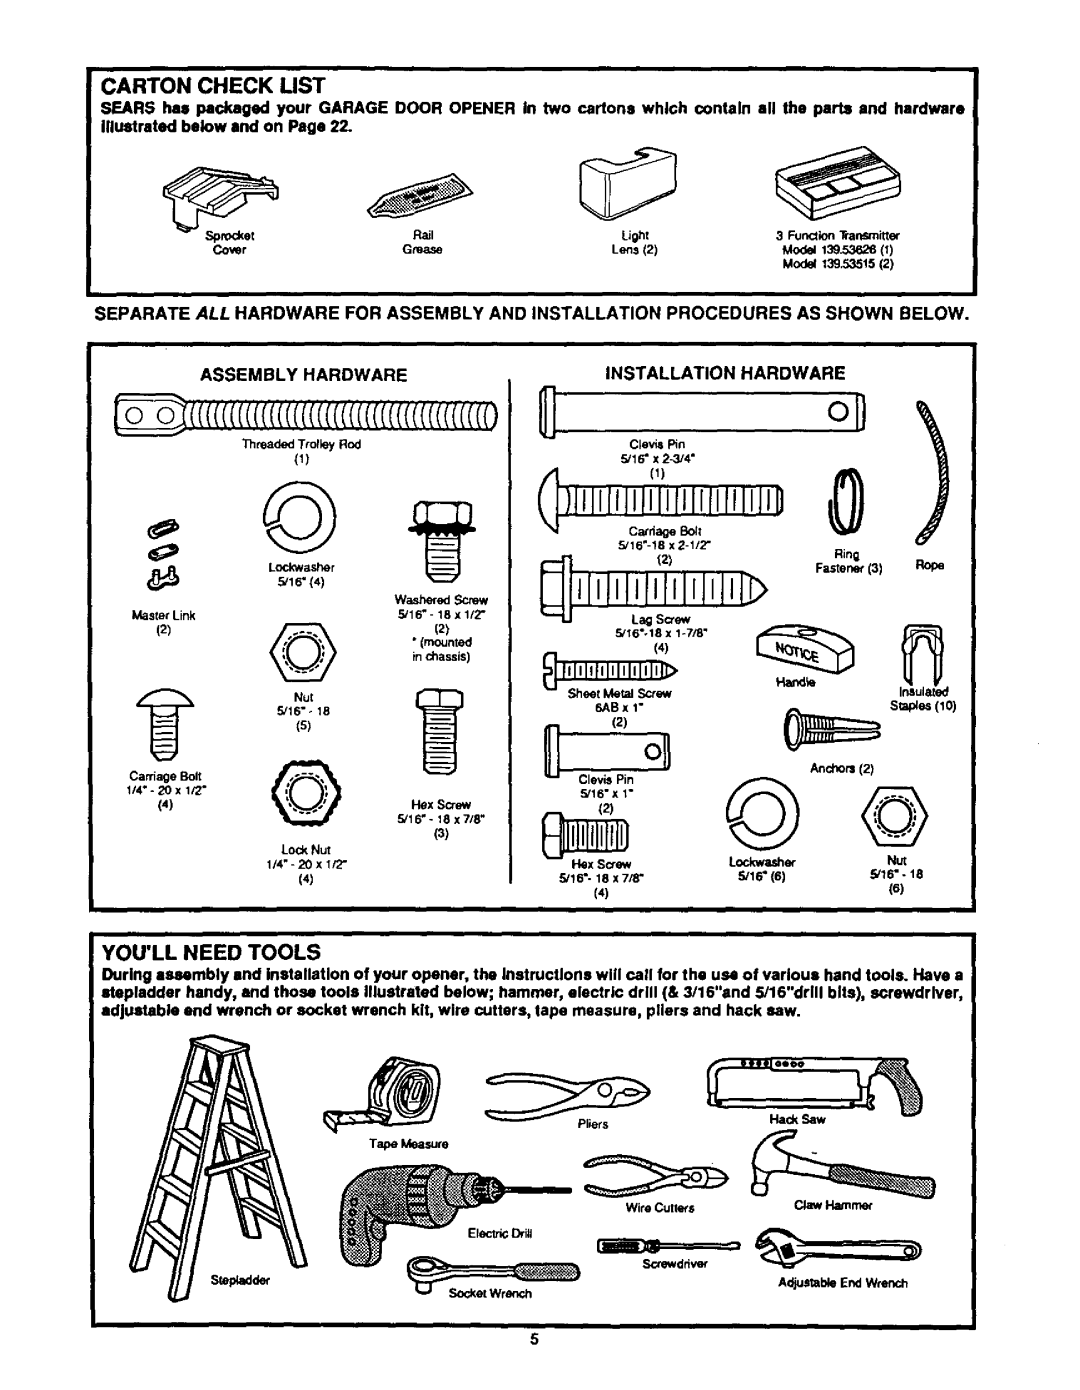 Craftsman 139.53626SR - I/2HP Carton Check List, Youll Need Tools, Illustrated below and on Page, Modd139.535152, Assembly 